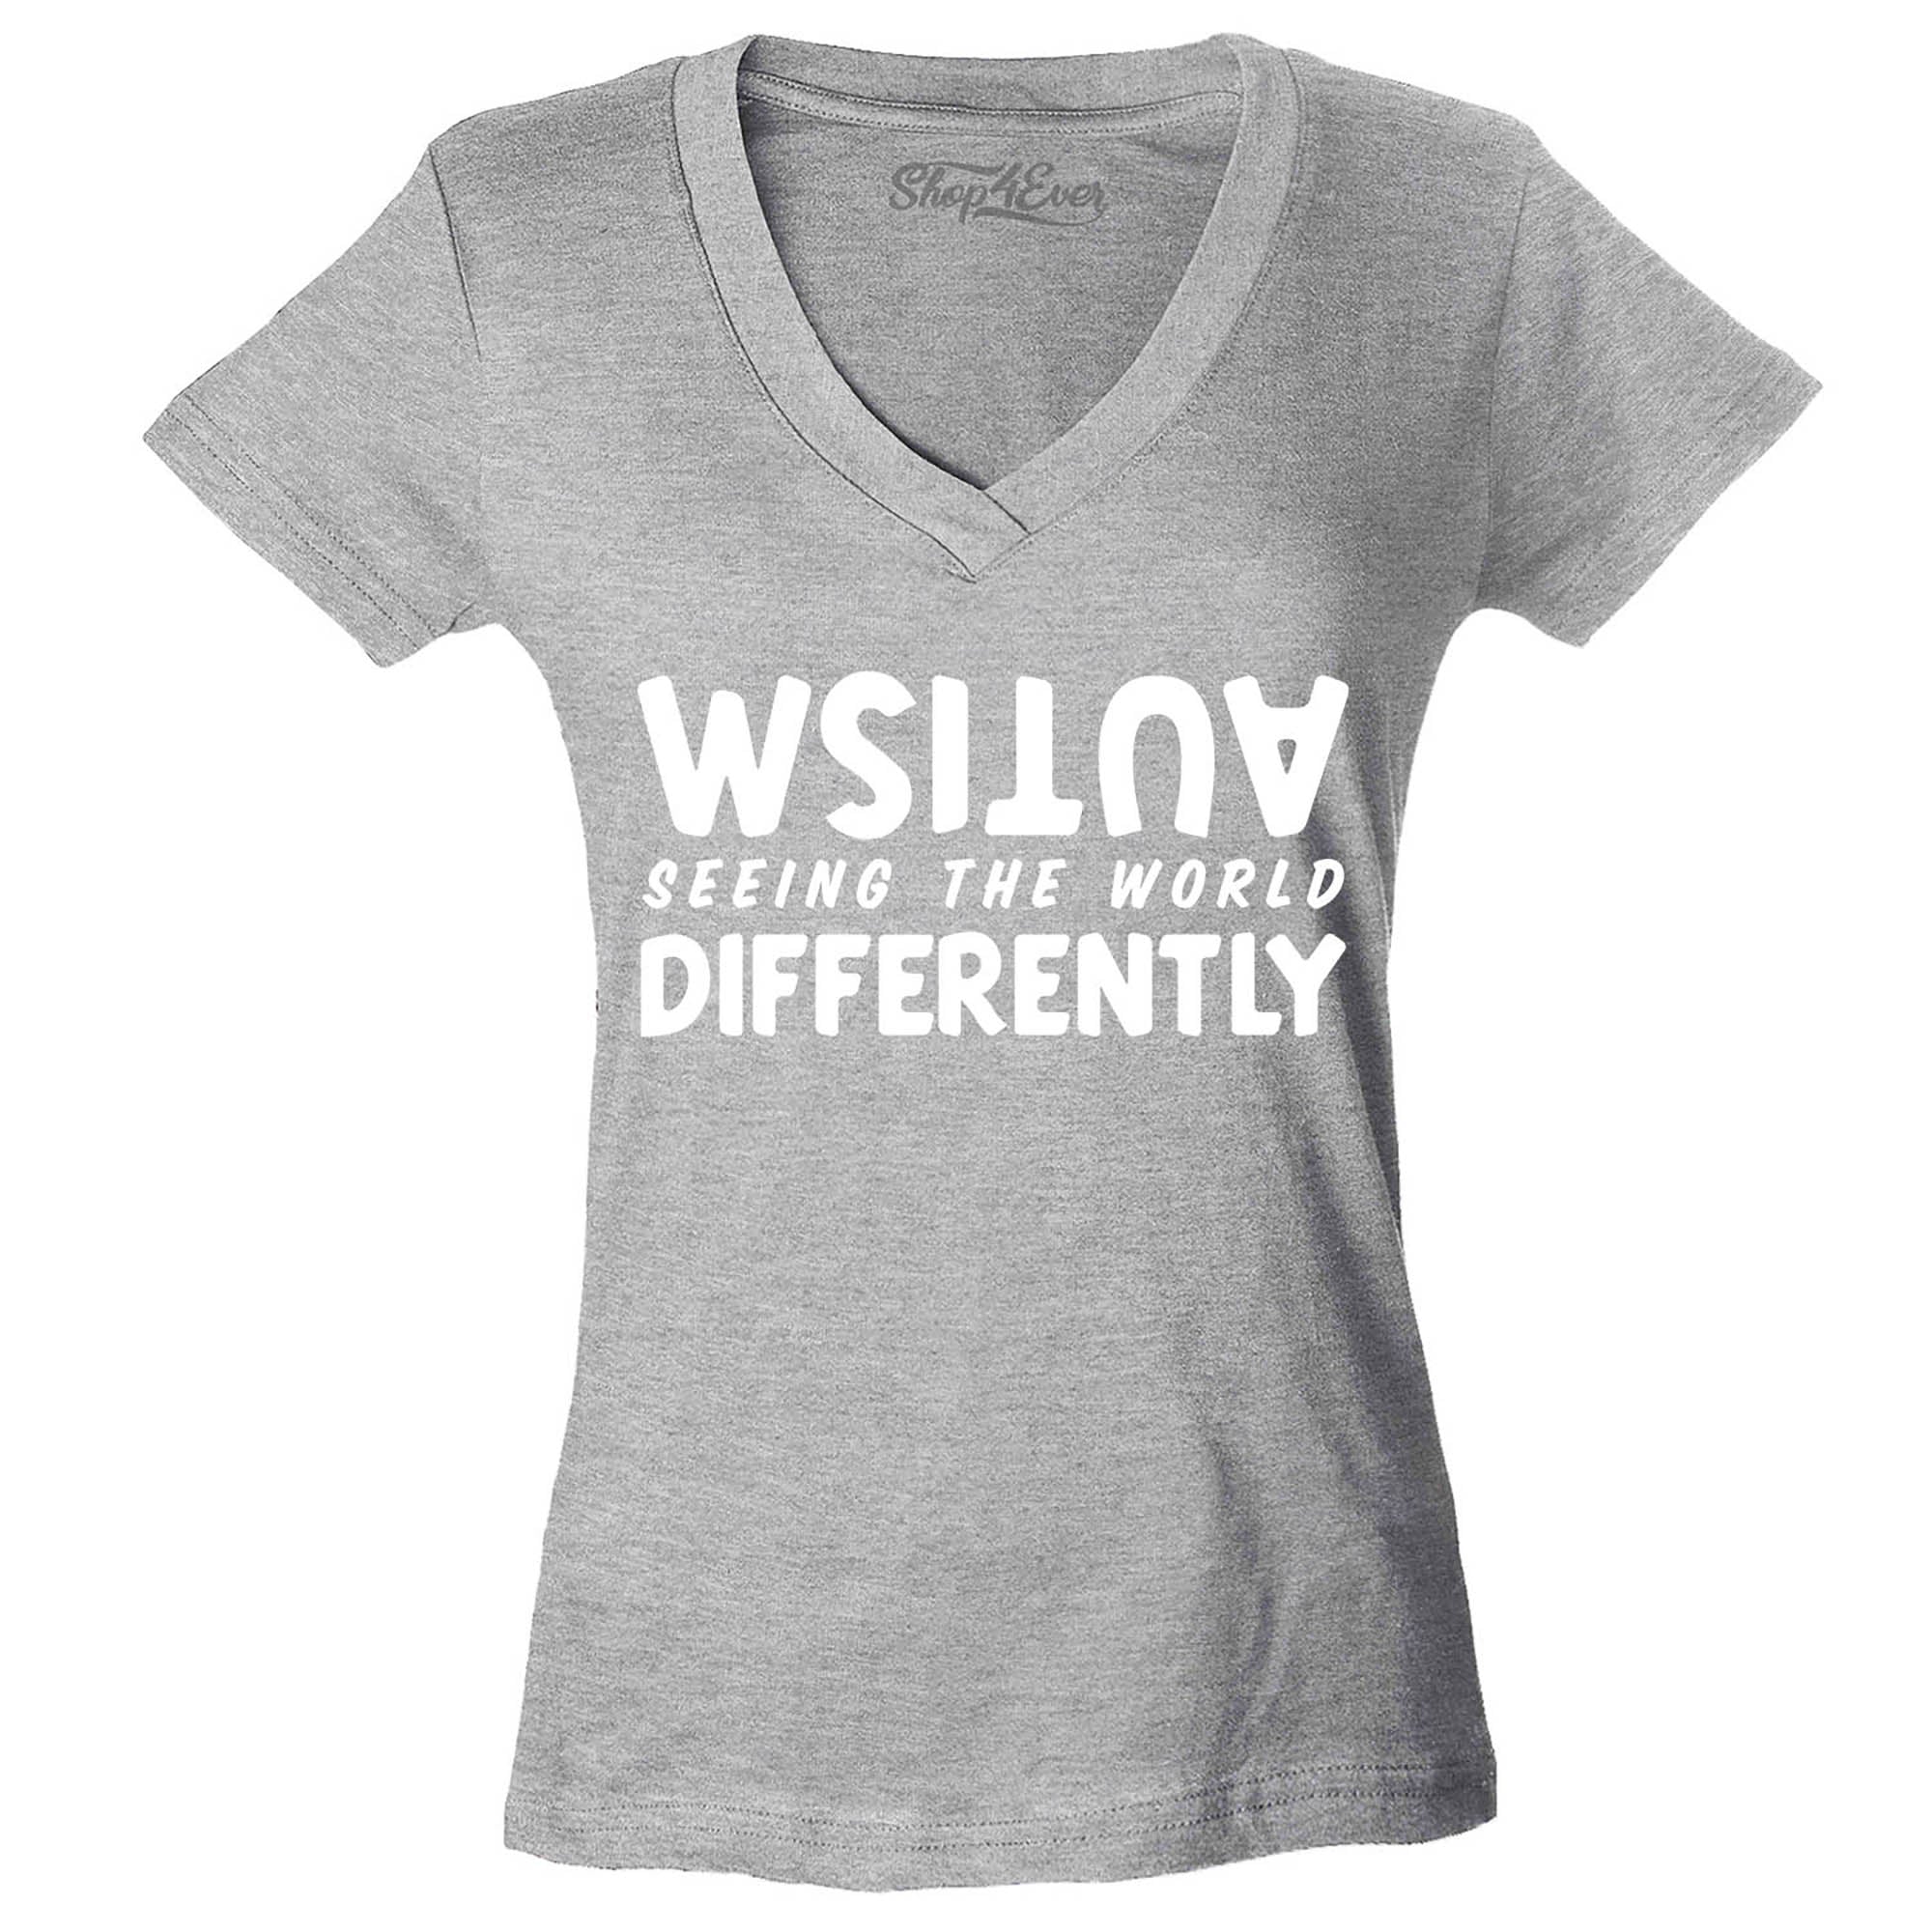 Autism Seeing The World Differently Women's V-Neck T-Shirt Slim Fit